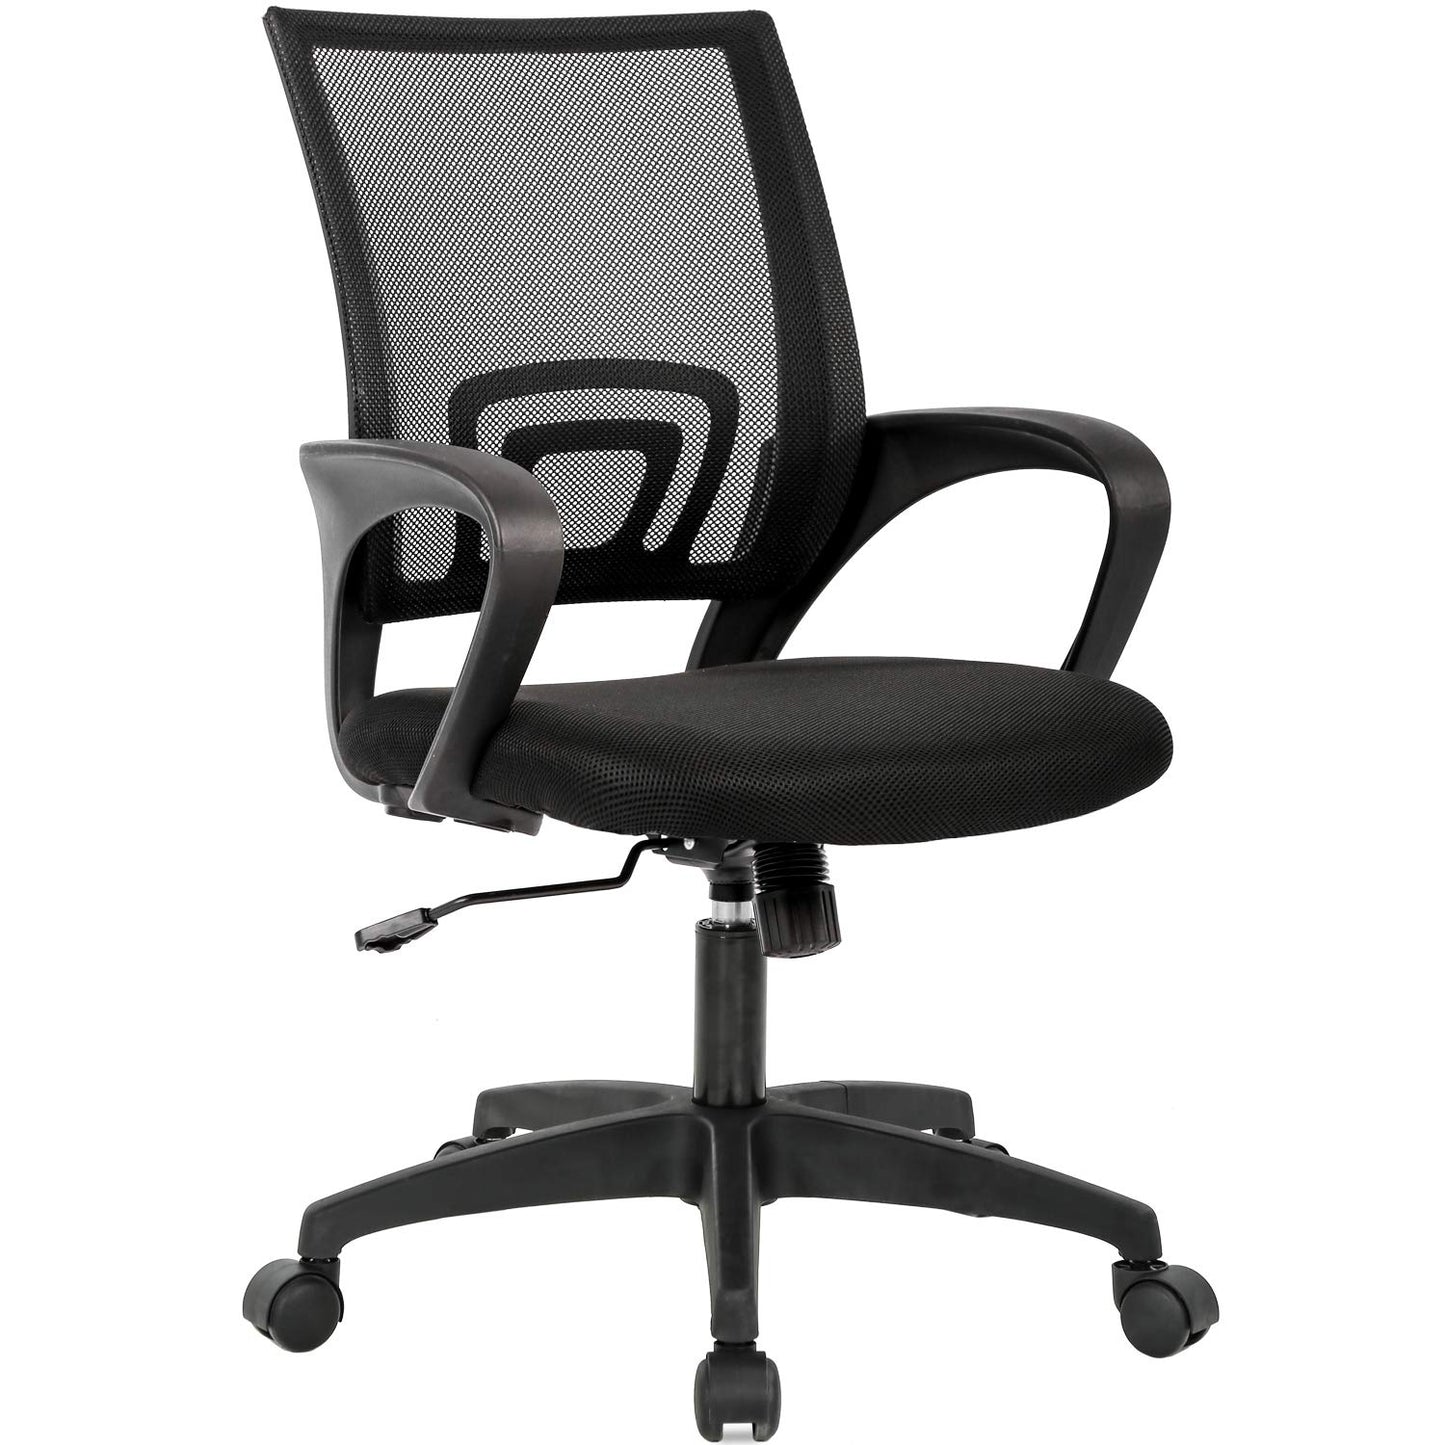 Office Chair Brand New Ergonomic Mesh Office Chair – Lumbar support – Breathable – Cost-effective - comfortable